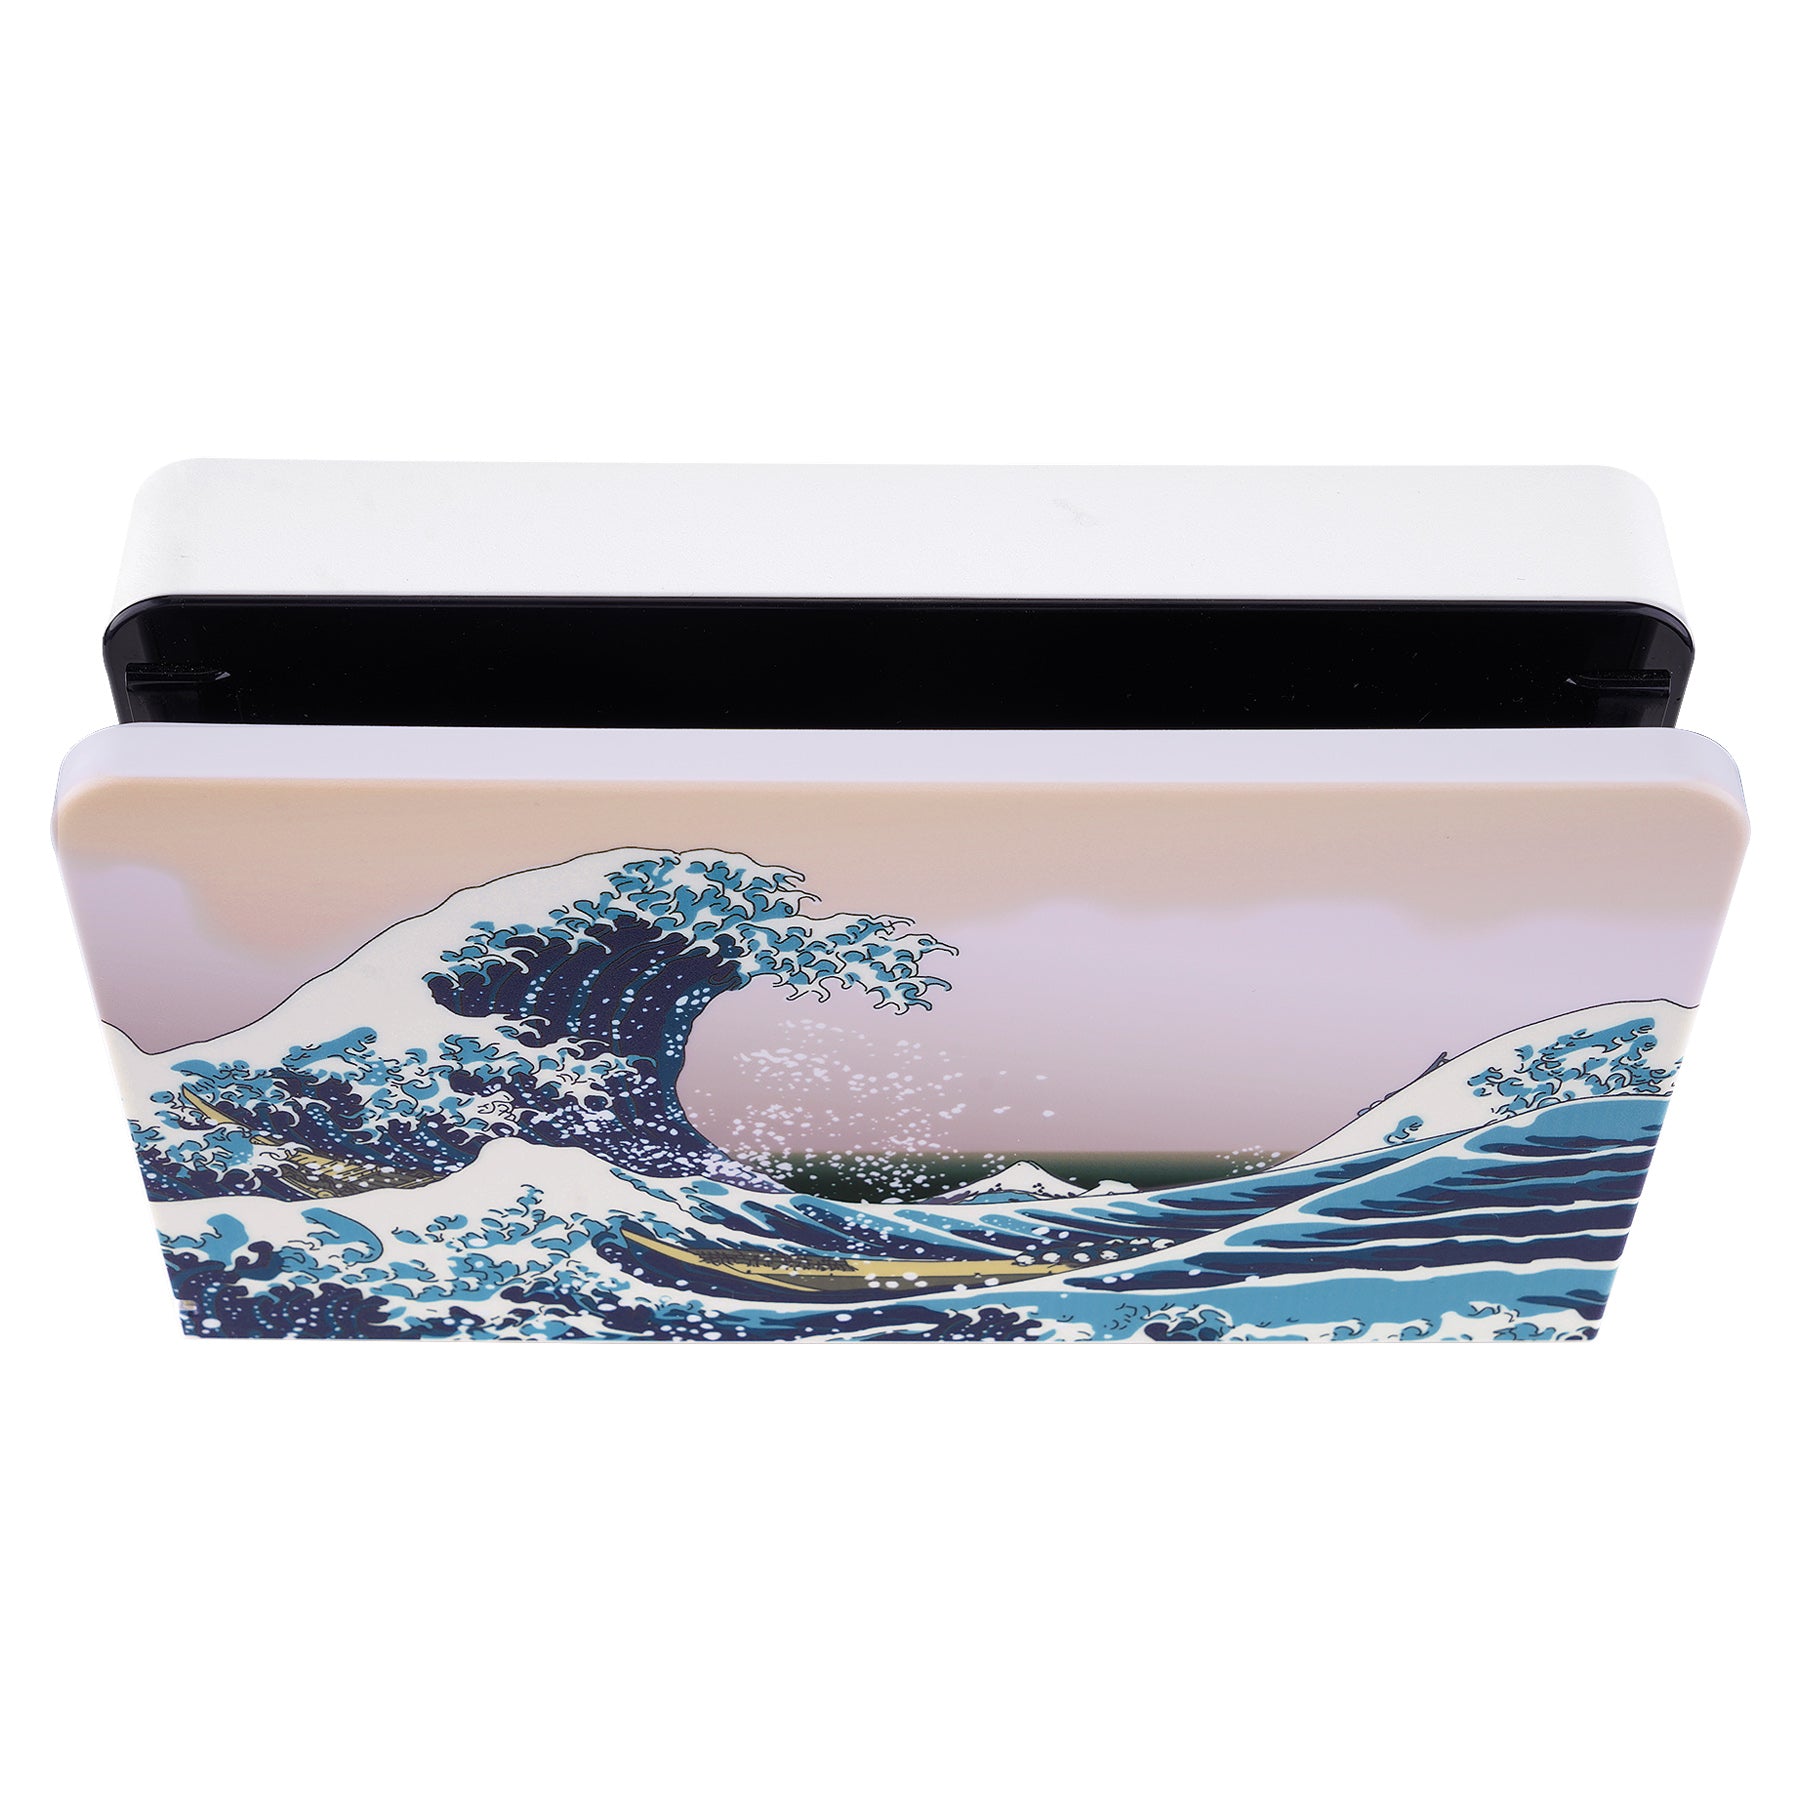 PlayVital The Great Wave Custom Dock Faceplate Cover for Nintendo Switch OLED Charging Dock - NTG8001 PlayVital